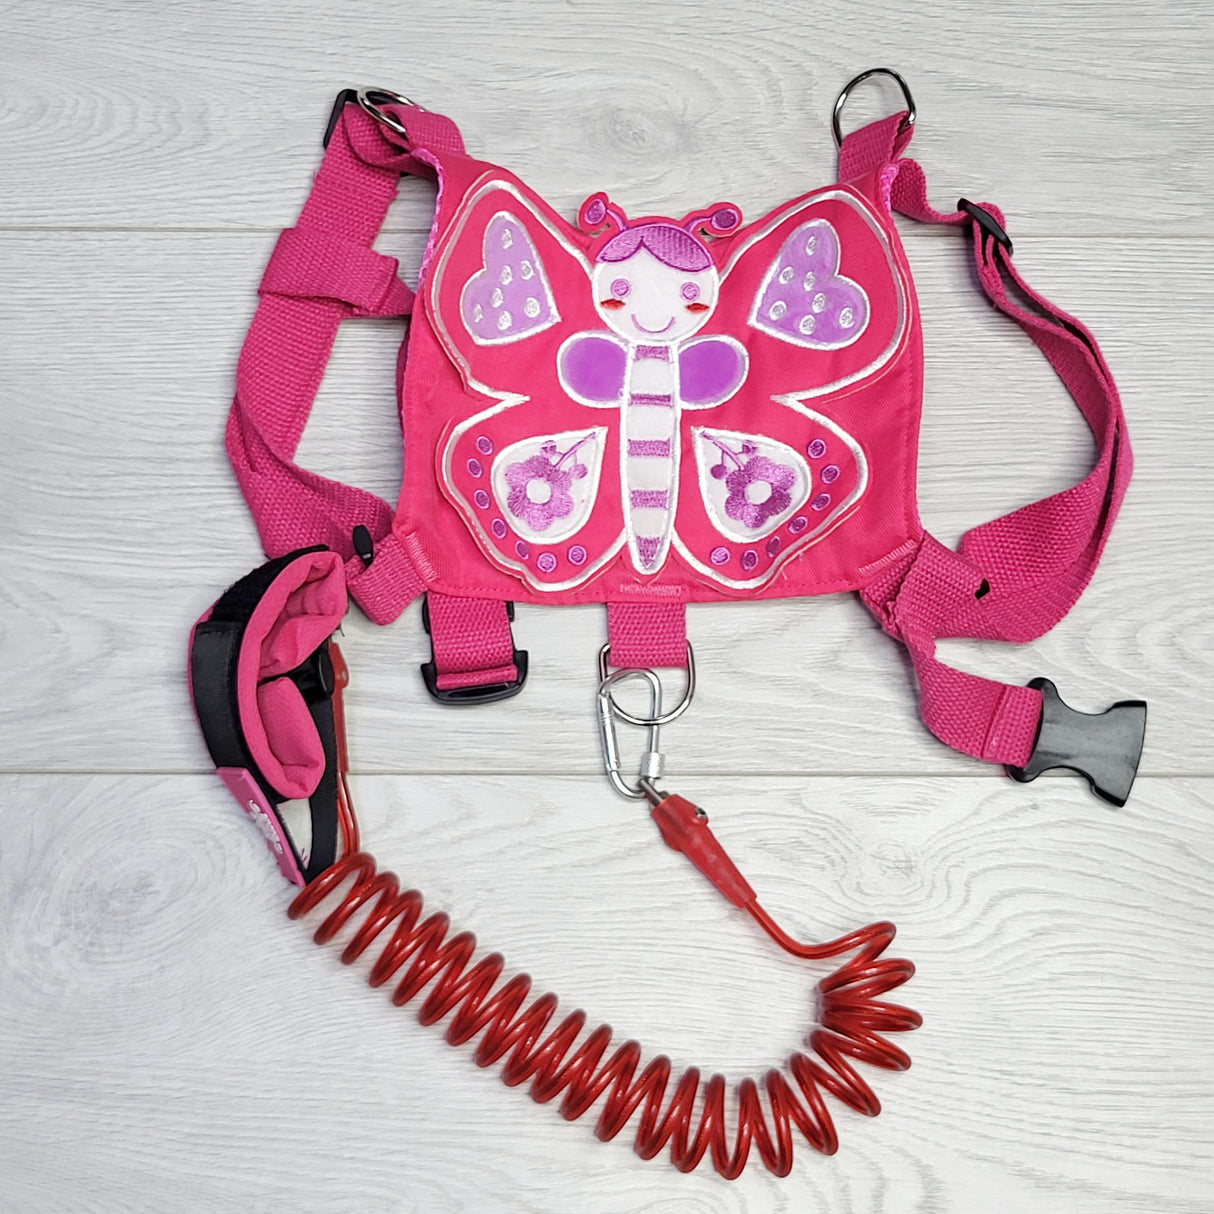 CRTH2 - Pink butterfly toddler harness